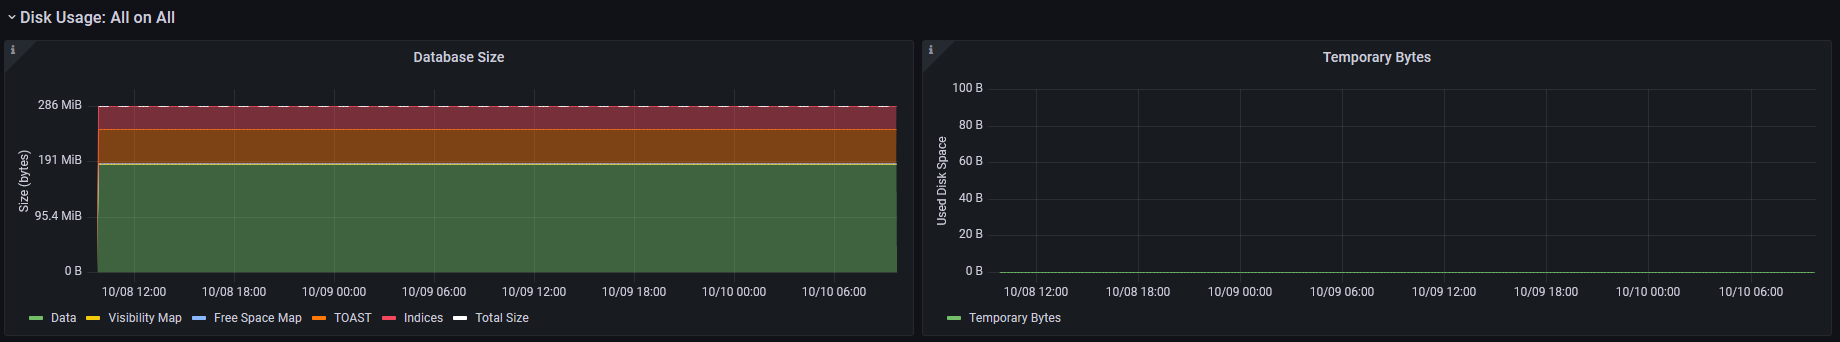 https://raw.githubusercontent.com/post-luxembourg/pgflux/v1.0.0.post4/docs/_images/grafana-dashboard-02.png